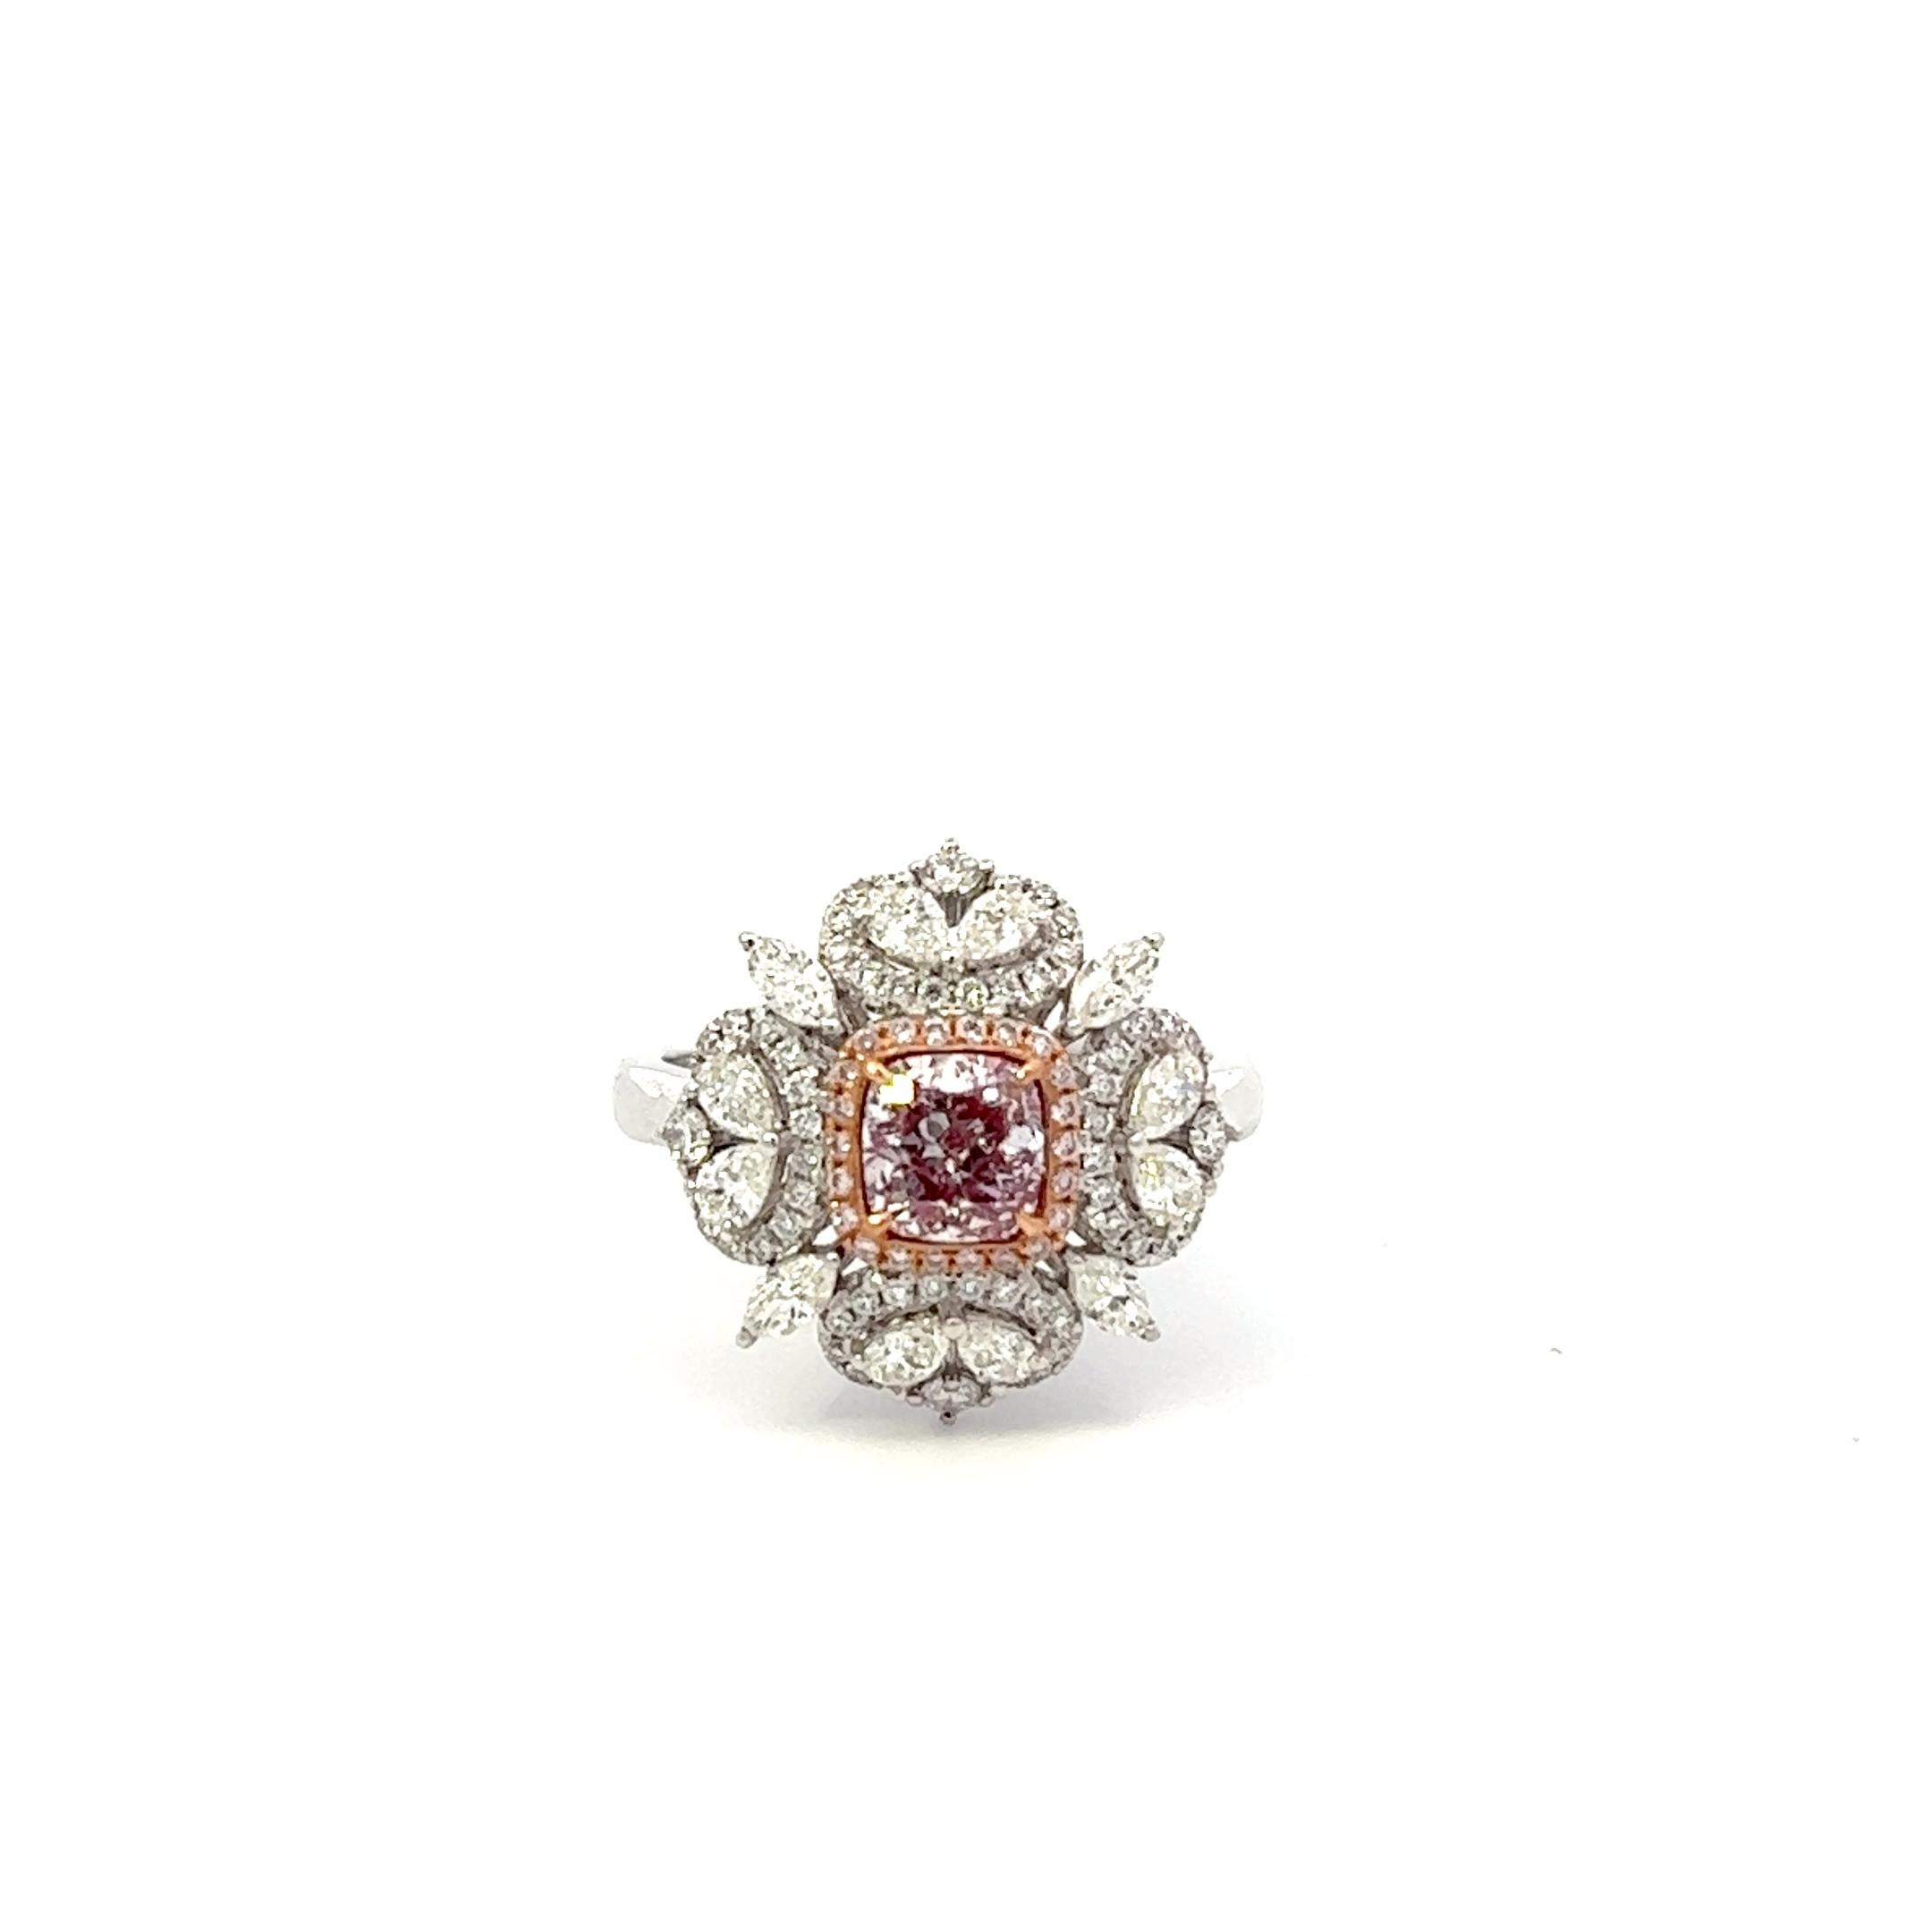 Center: 0.84ct Light Pink Cushion I1 GIA# 2183657579
Setting: 18k White Gold 0.93ctw Pink and White Diamonds

An extremely rare and stunning natural pink diamond center. Pink Diamonds account for less than 0.01% of all diamonds mined in the world!